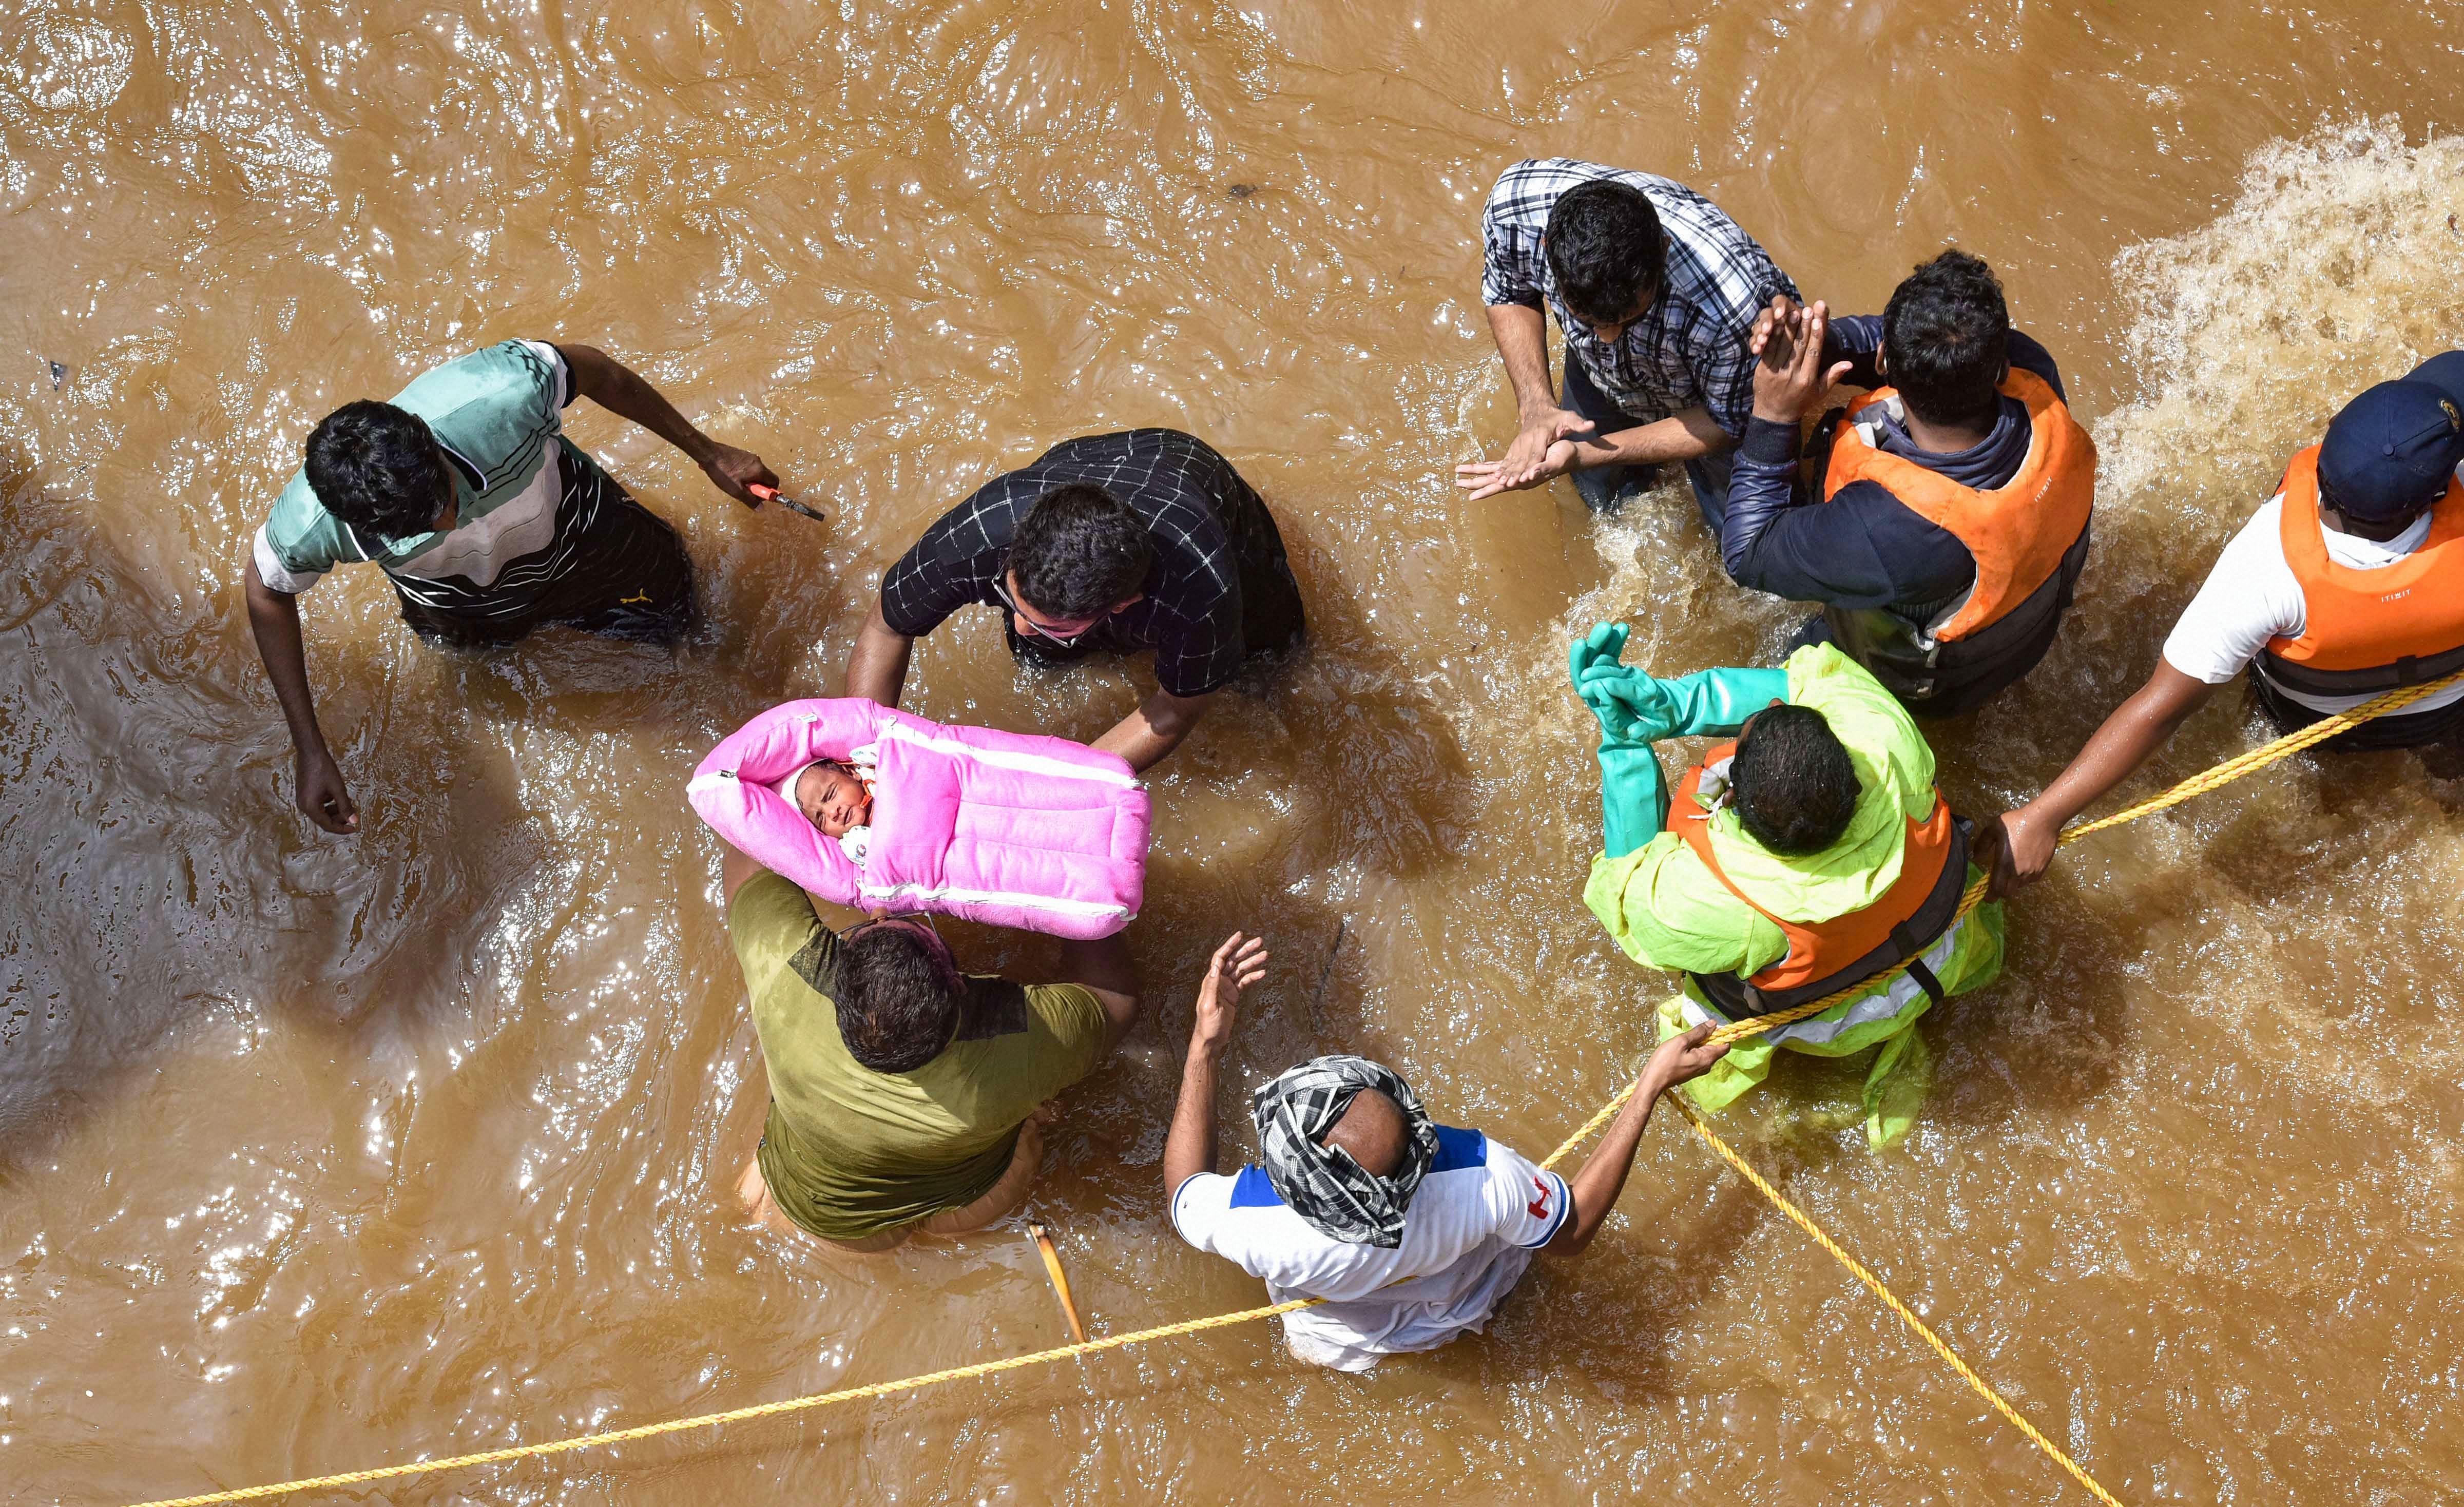 GHMC personnel carry an infant during an operation to move flood-affected people to a safer place, at Hafiz Baba Nagar in Hyderabad, Sunday, Oct. 18, 2020. Credit: PTI Photo